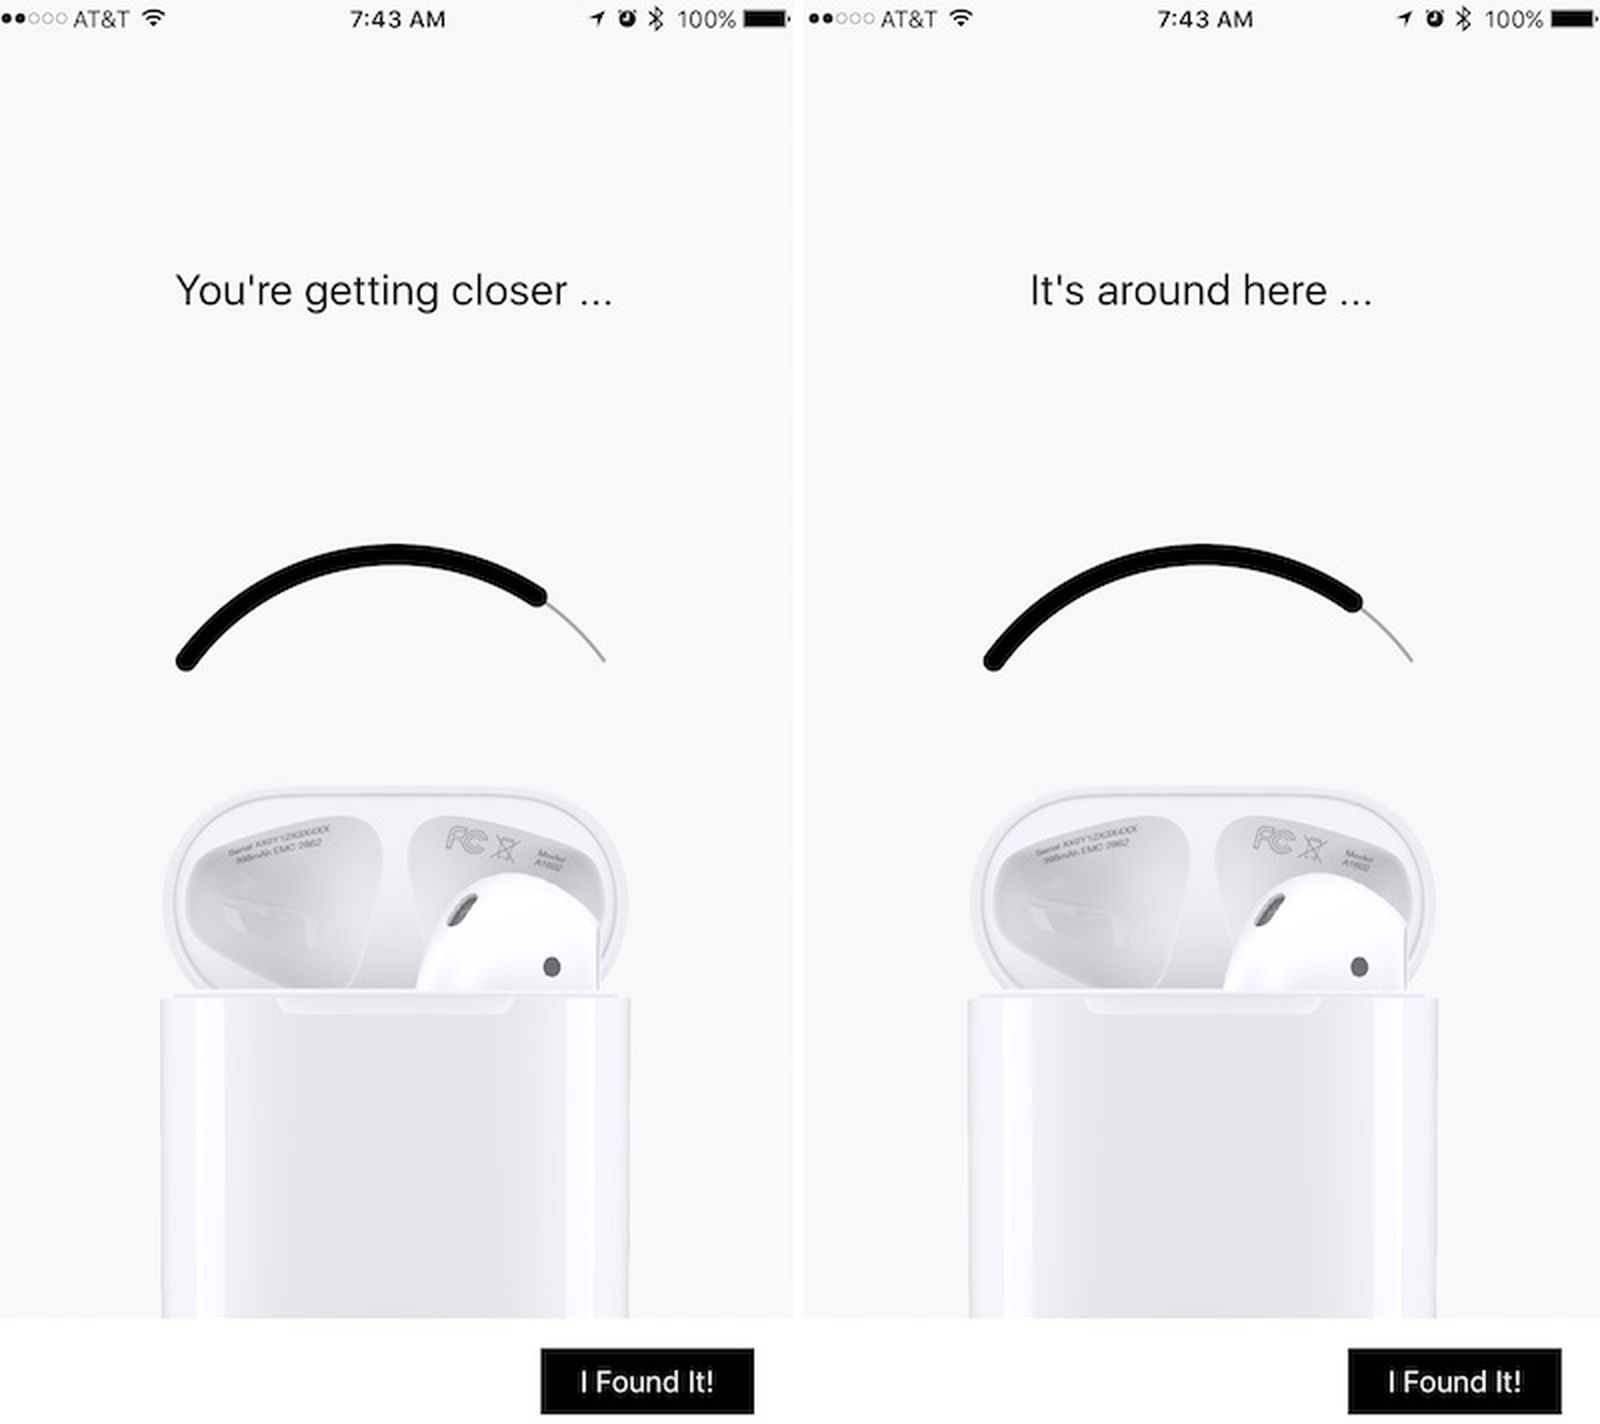 strejke Borgmester Notesbog Finder for AirPods' App Can Help You Track Down a Missing AirPod [Update:  App Removed From App Store] - MacRumors